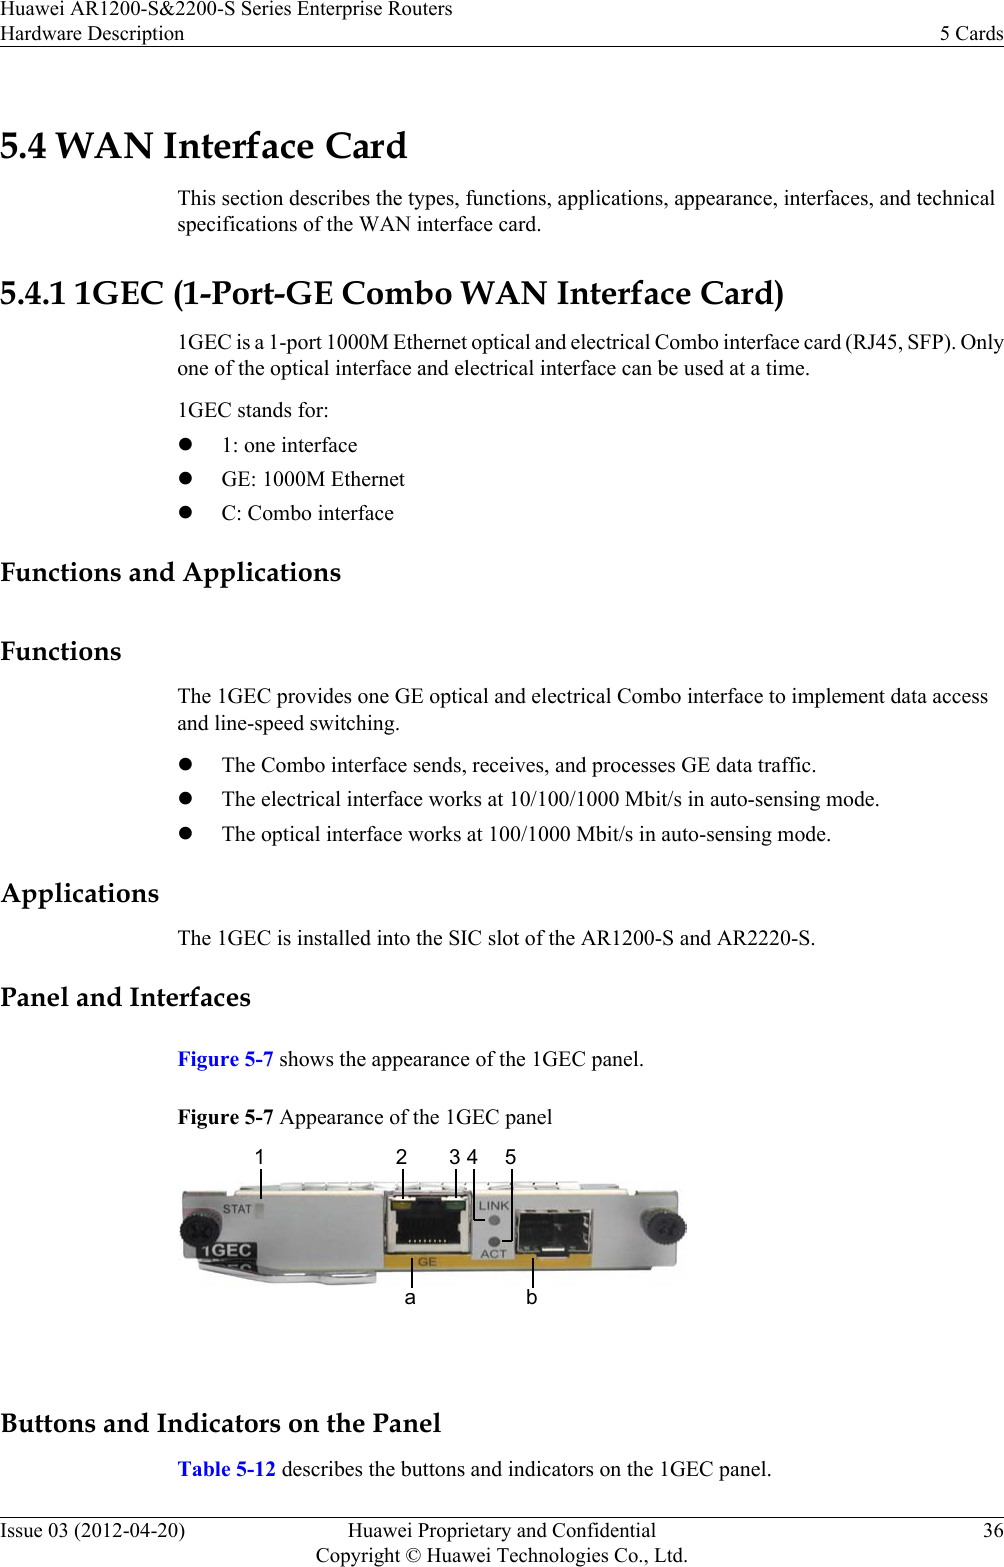 5.4 WAN Interface CardThis section describes the types, functions, applications, appearance, interfaces, and technicalspecifications of the WAN interface card.5.4.1 1GEC (1-Port-GE Combo WAN Interface Card)1GEC is a 1-port 1000M Ethernet optical and electrical Combo interface card (RJ45, SFP). Onlyone of the optical interface and electrical interface can be used at a time.1GEC stands for:l1: one interfacelGE: 1000M EthernetlC: Combo interfaceFunctions and ApplicationsFunctionsThe 1GEC provides one GE optical and electrical Combo interface to implement data accessand line-speed switching.lThe Combo interface sends, receives, and processes GE data traffic.lThe electrical interface works at 10/100/1000 Mbit/s in auto-sensing mode.lThe optical interface works at 100/1000 Mbit/s in auto-sensing mode.ApplicationsThe 1GEC is installed into the SIC slot of the AR1200-S and AR2220-S.Panel and InterfacesFigure 5-7 shows the appearance of the 1GEC panel.Figure 5-7 Appearance of the 1GEC panel12 3 4 5a b Buttons and Indicators on the PanelTable 5-12 describes the buttons and indicators on the 1GEC panel.Huawei AR1200-S&amp;2200-S Series Enterprise RoutersHardware Description 5 CardsIssue 03 (2012-04-20) Huawei Proprietary and ConfidentialCopyright © Huawei Technologies Co., Ltd.36